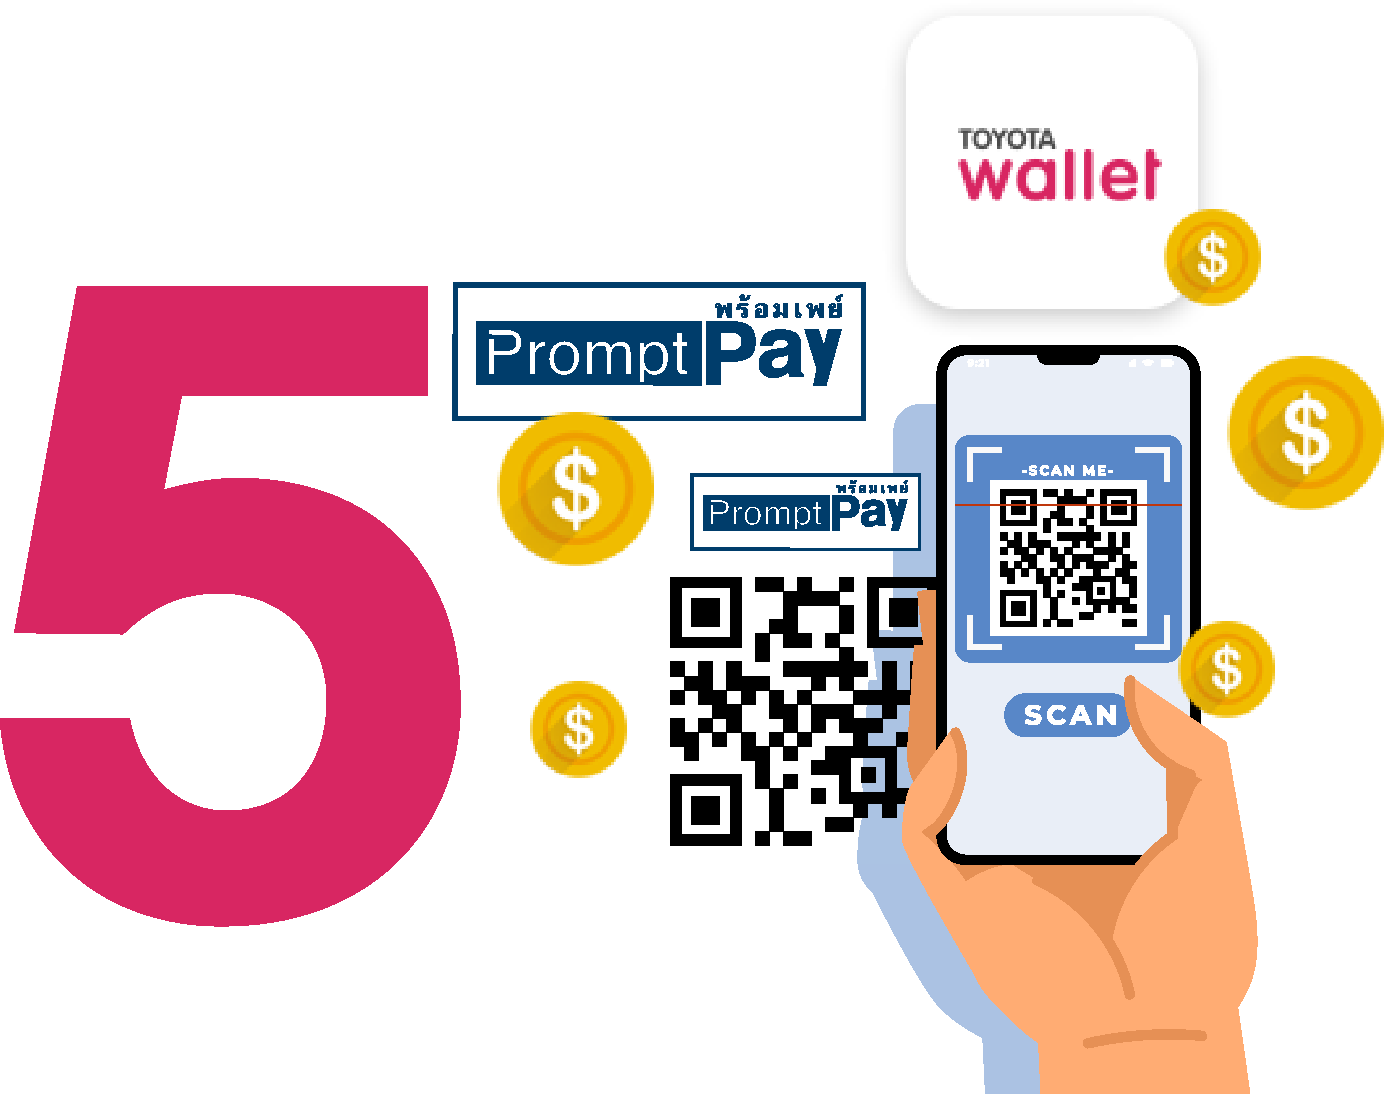 Services payment by QR PromptPay